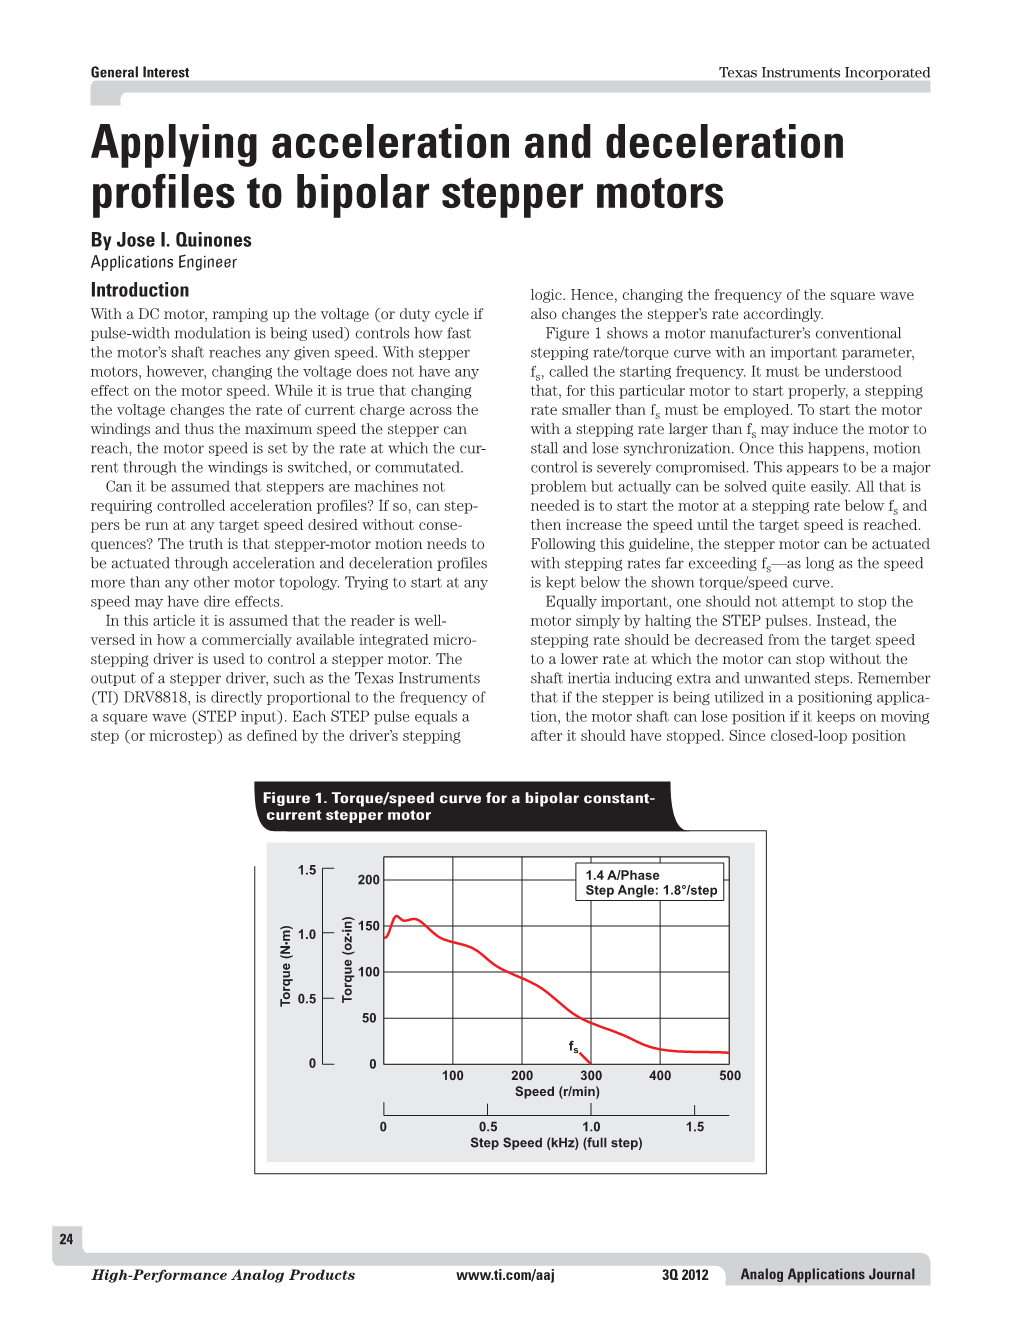 Applying Acceleration and Deceleration Profiles to Bipolar Stepper Motors by Jose I